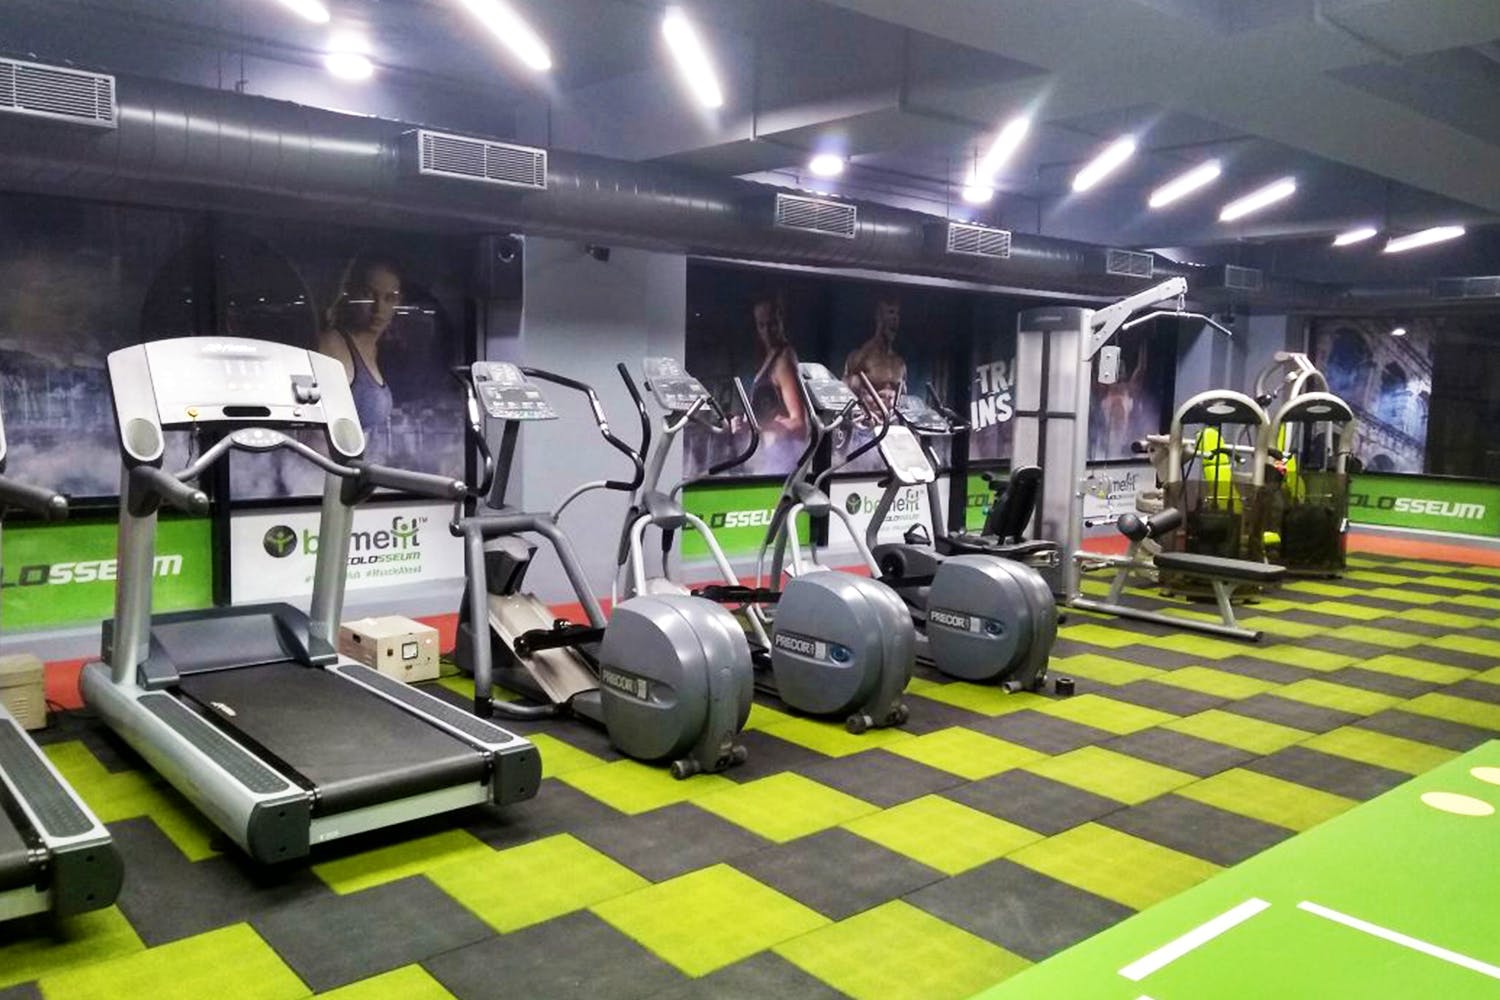 Gym,Room,Sport venue,Leisure,Exercise equipment,Physical fitness,Sports training,Flooring